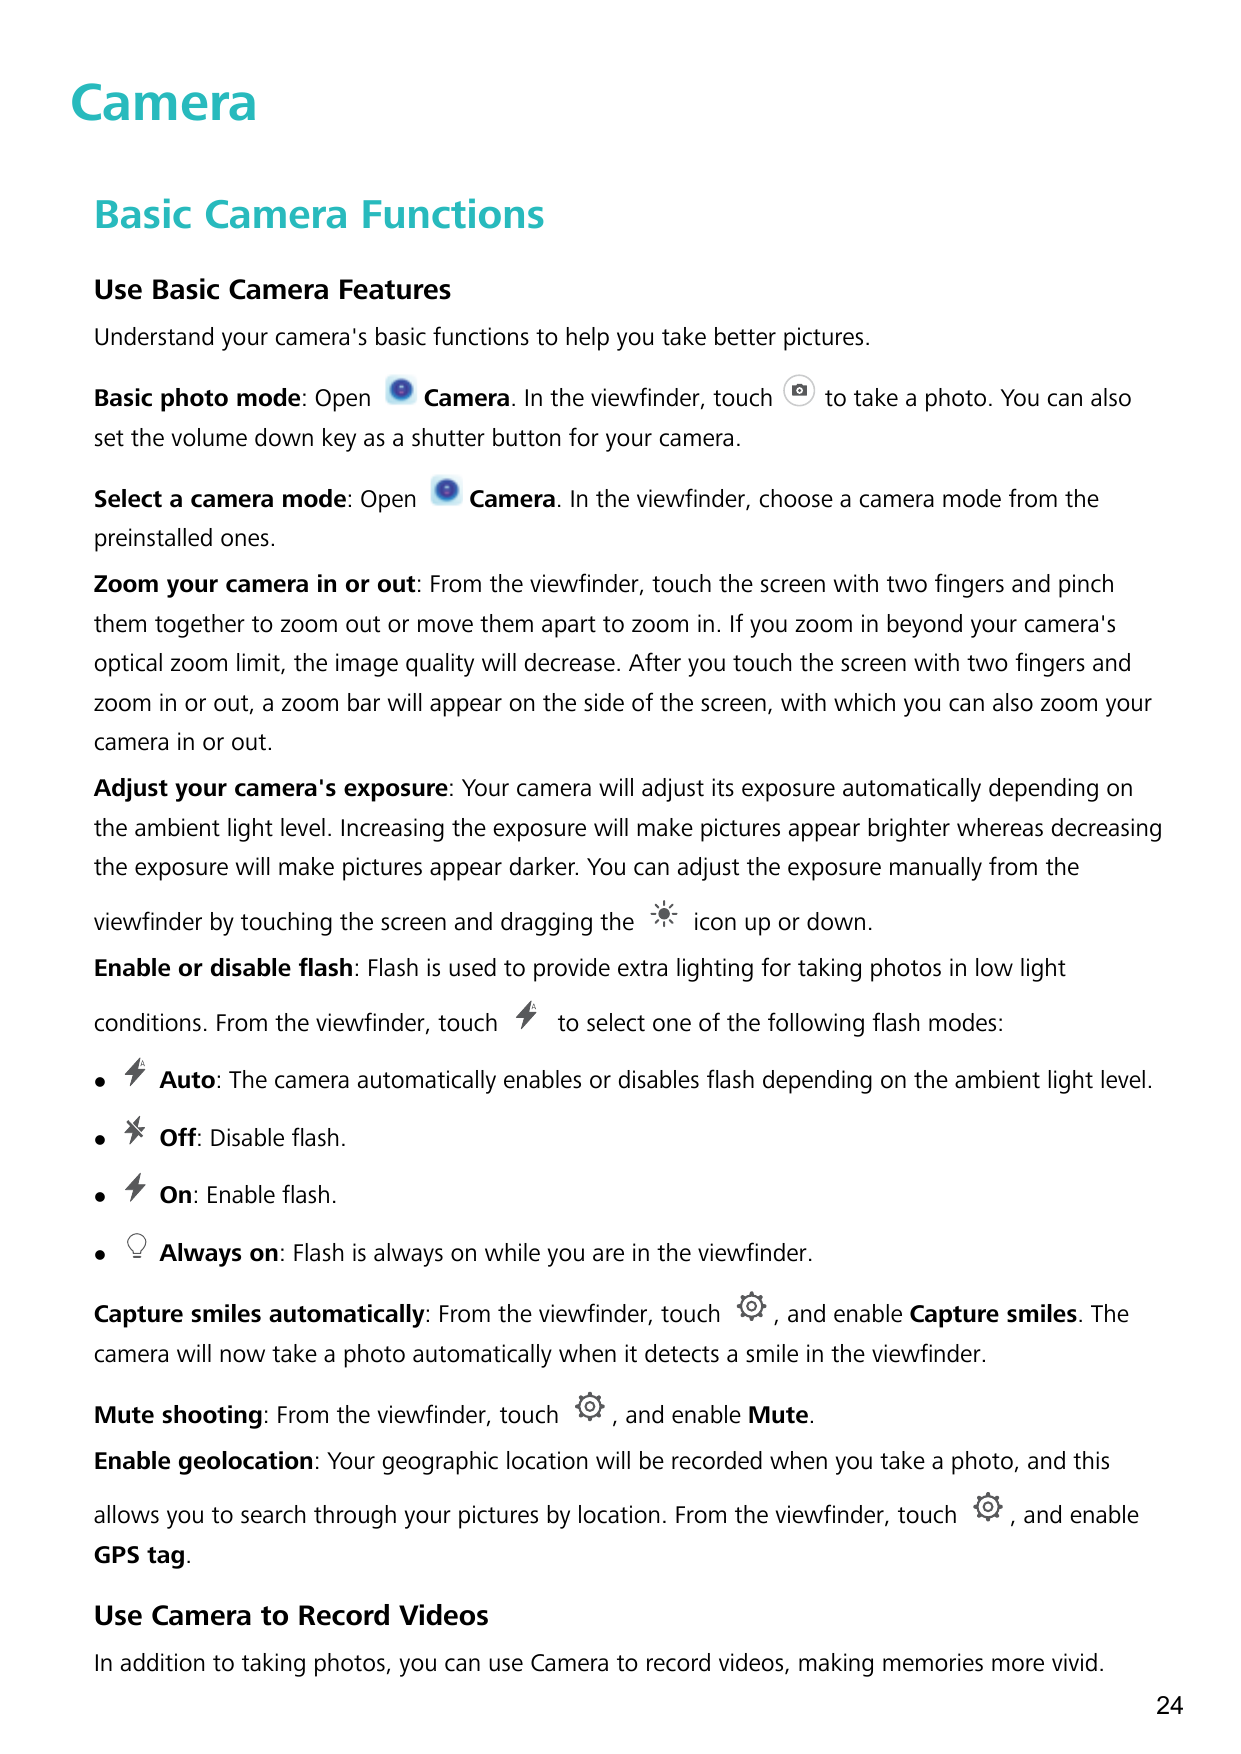 CameraBasic Camera FunctionsUse Basic Camera FeaturesUnderstand your camera's basic functions to help you take better pictures.B